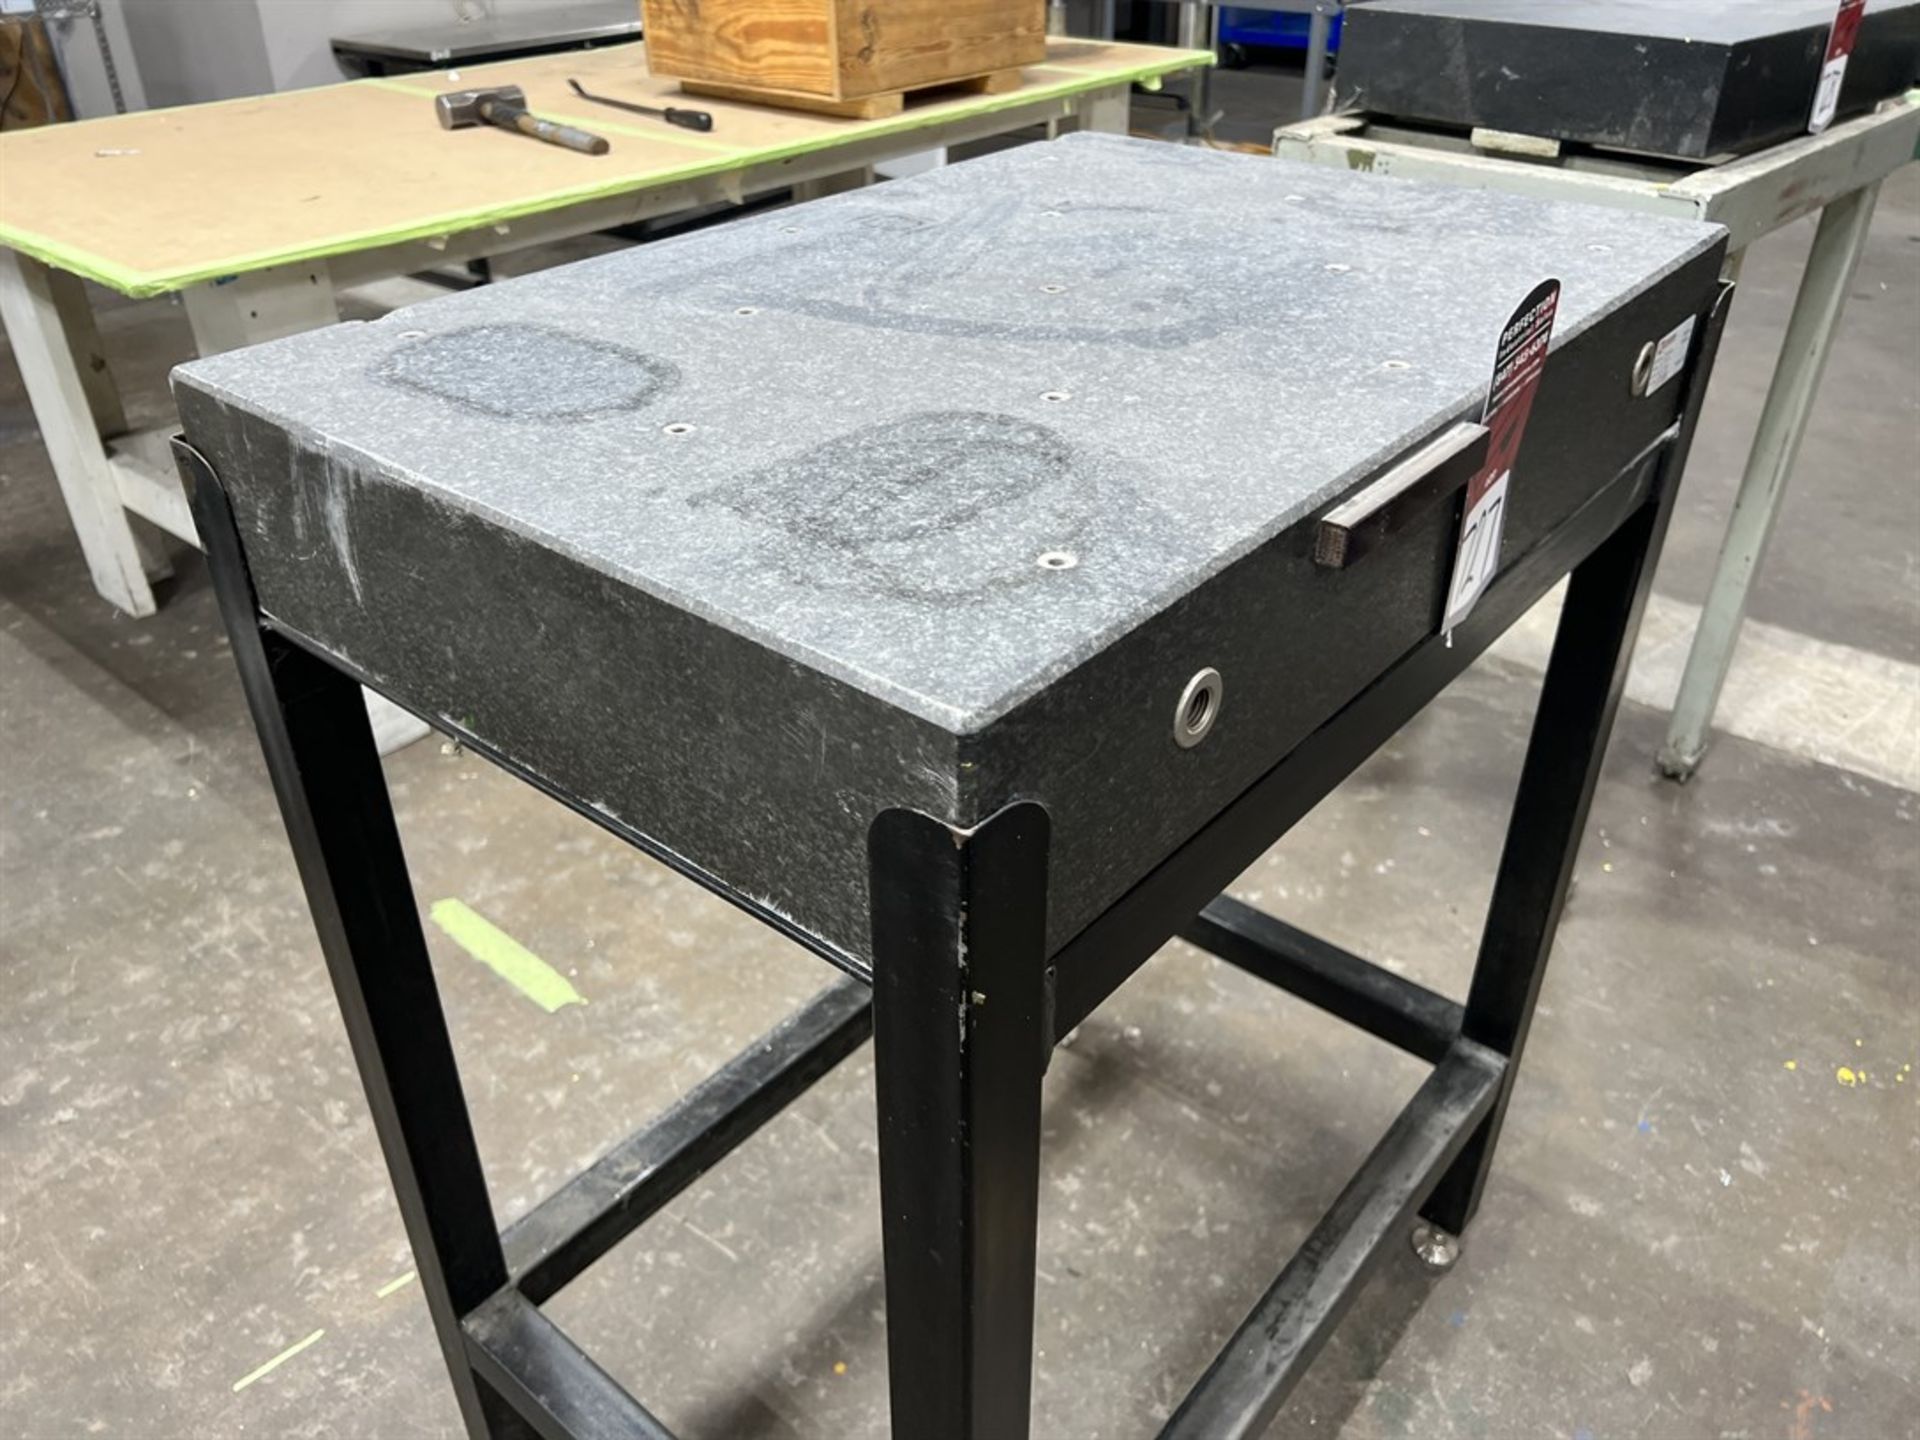 Granite Surface Plate, 22" x 33" x 5.5" Thick, on Steel Base, (BRIDGEPORT BUILDING) - Image 2 of 3